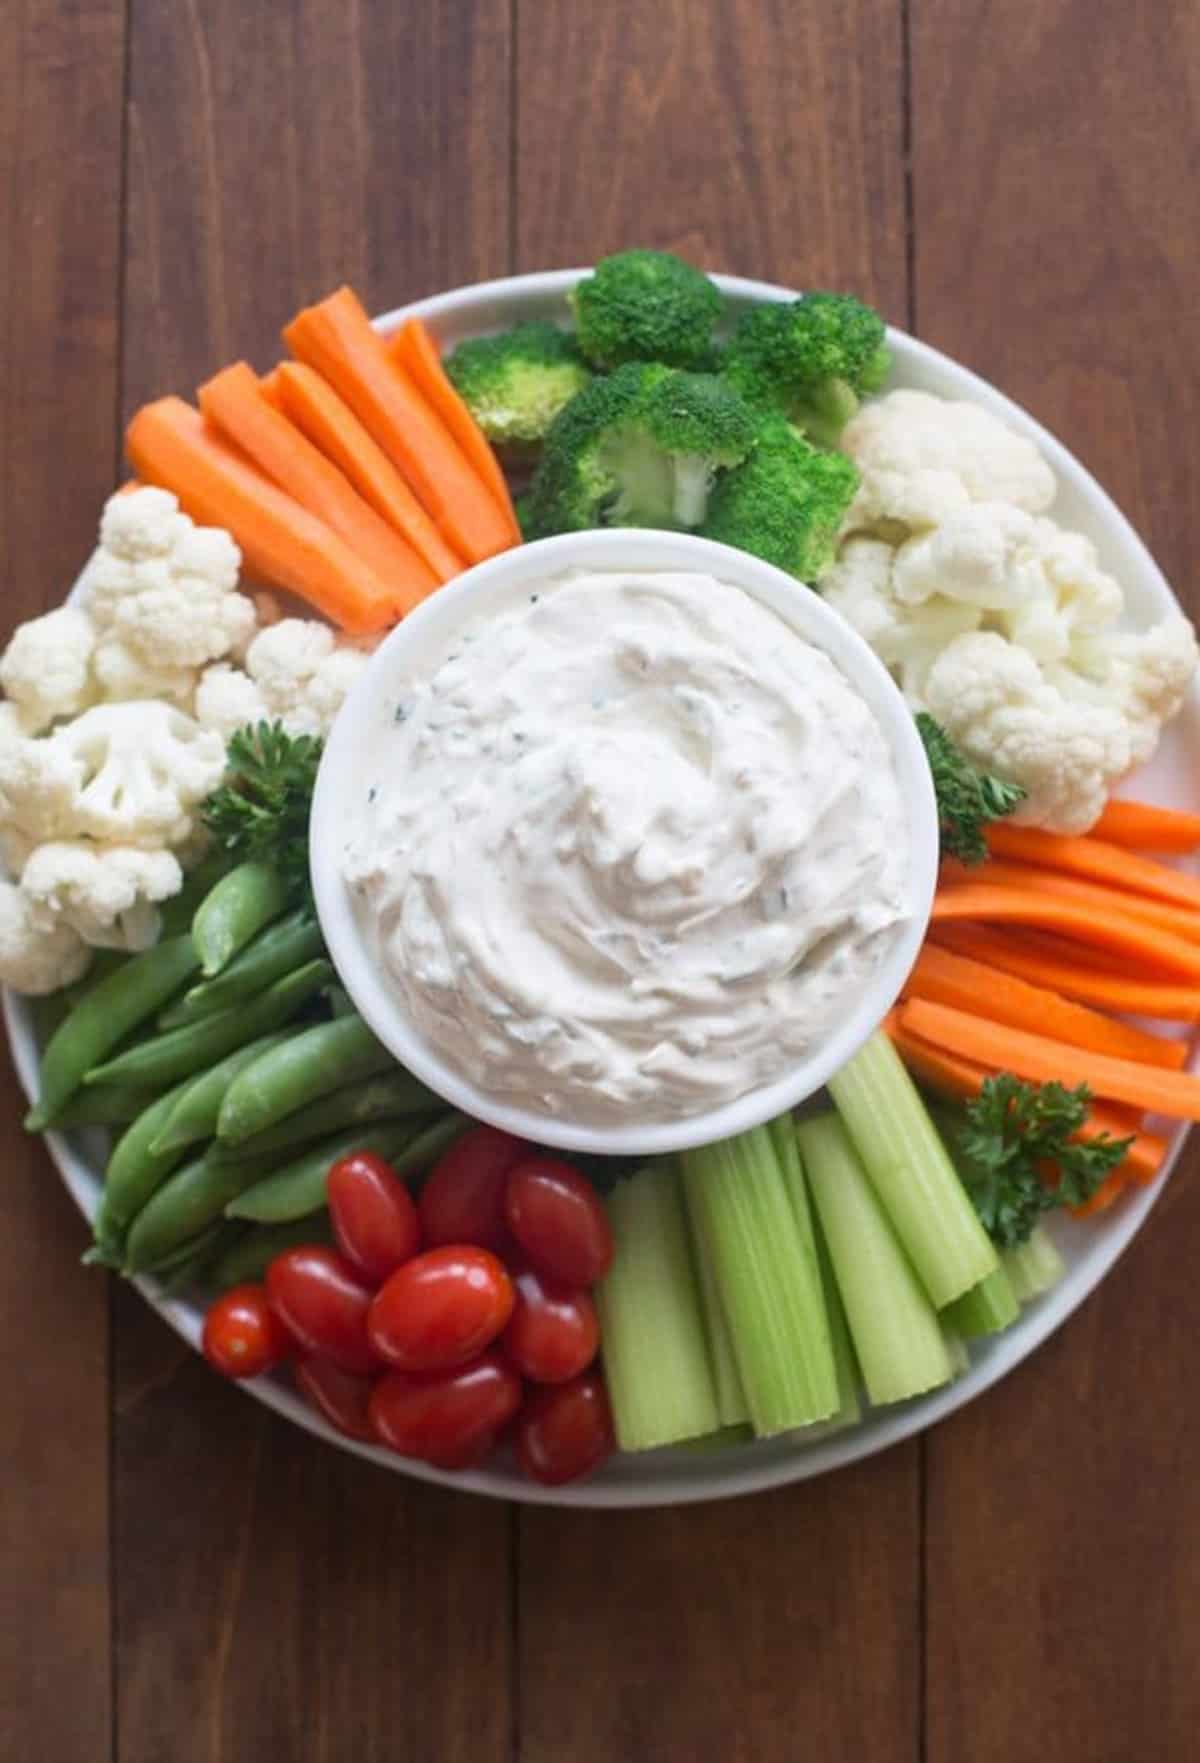 A platter of fresh cut vegetables with a bowl of vegetable dip in the center.